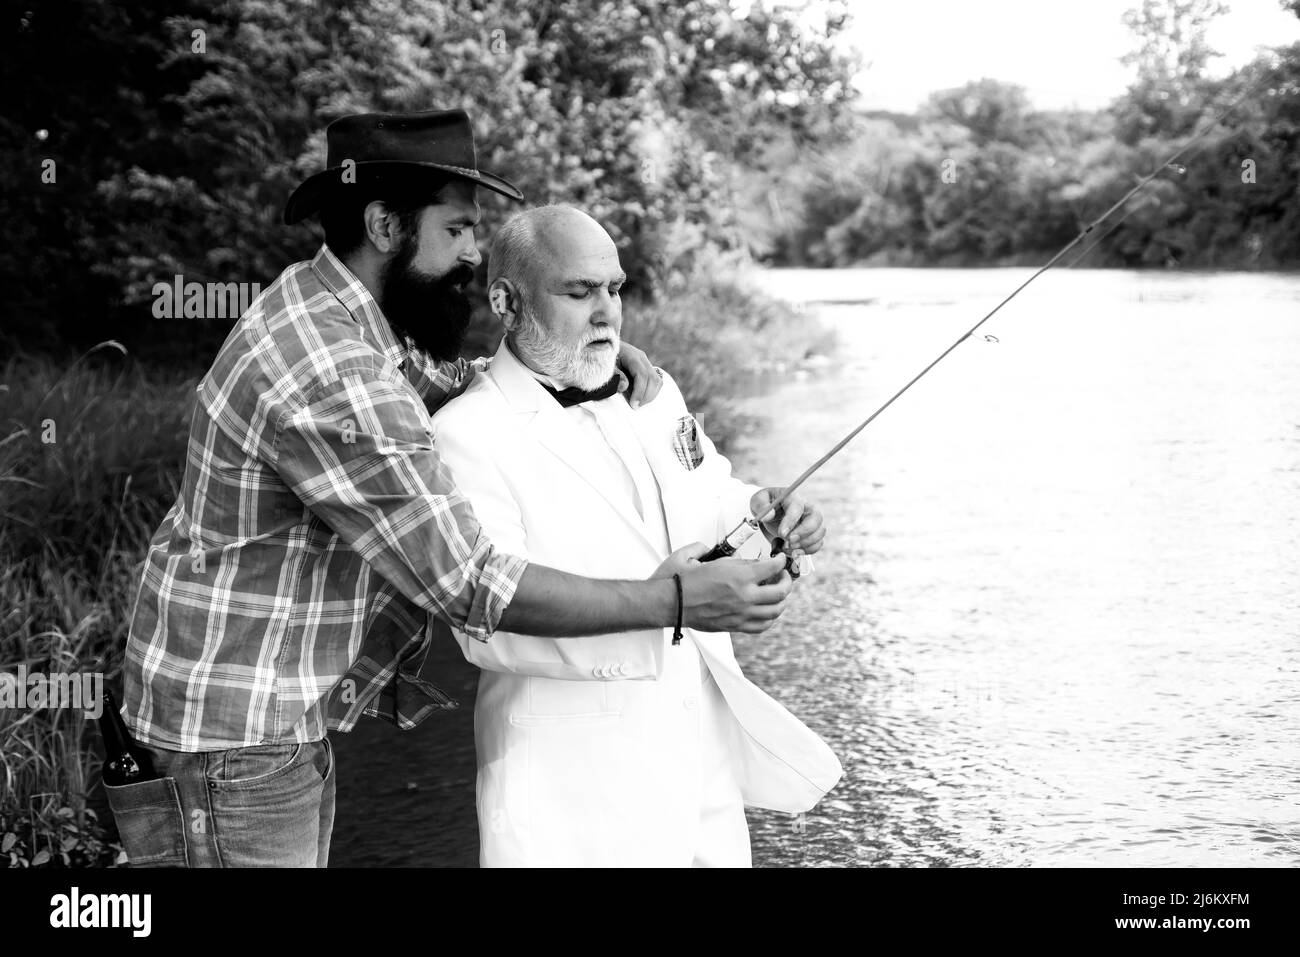 Family and generation - summer holidays and people concept. Man fisherman catches a fish. Brown trout fish. Happy father and son fishing in river Stock Photo